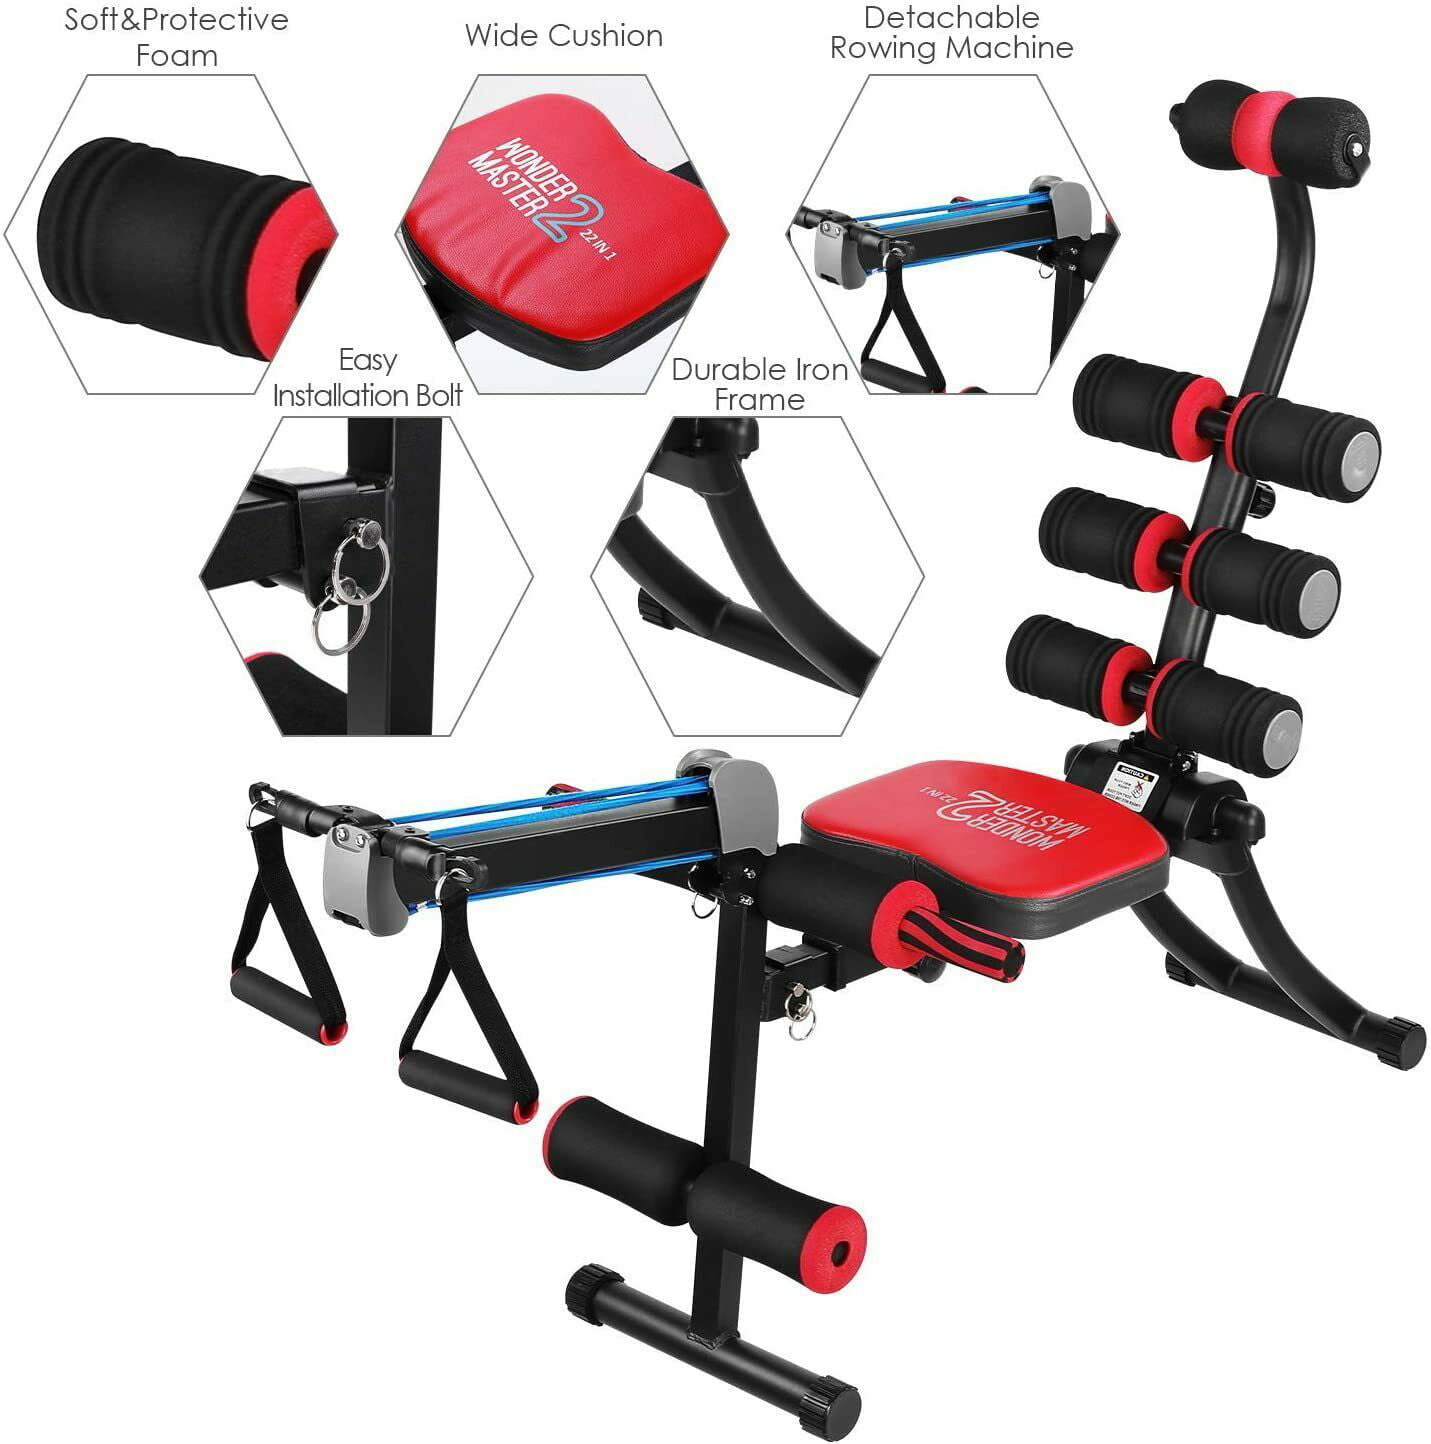 Details about   Adjustable Foldable AB Weight Bench Roman Chair Stool w/ Waist Twisting Machine 